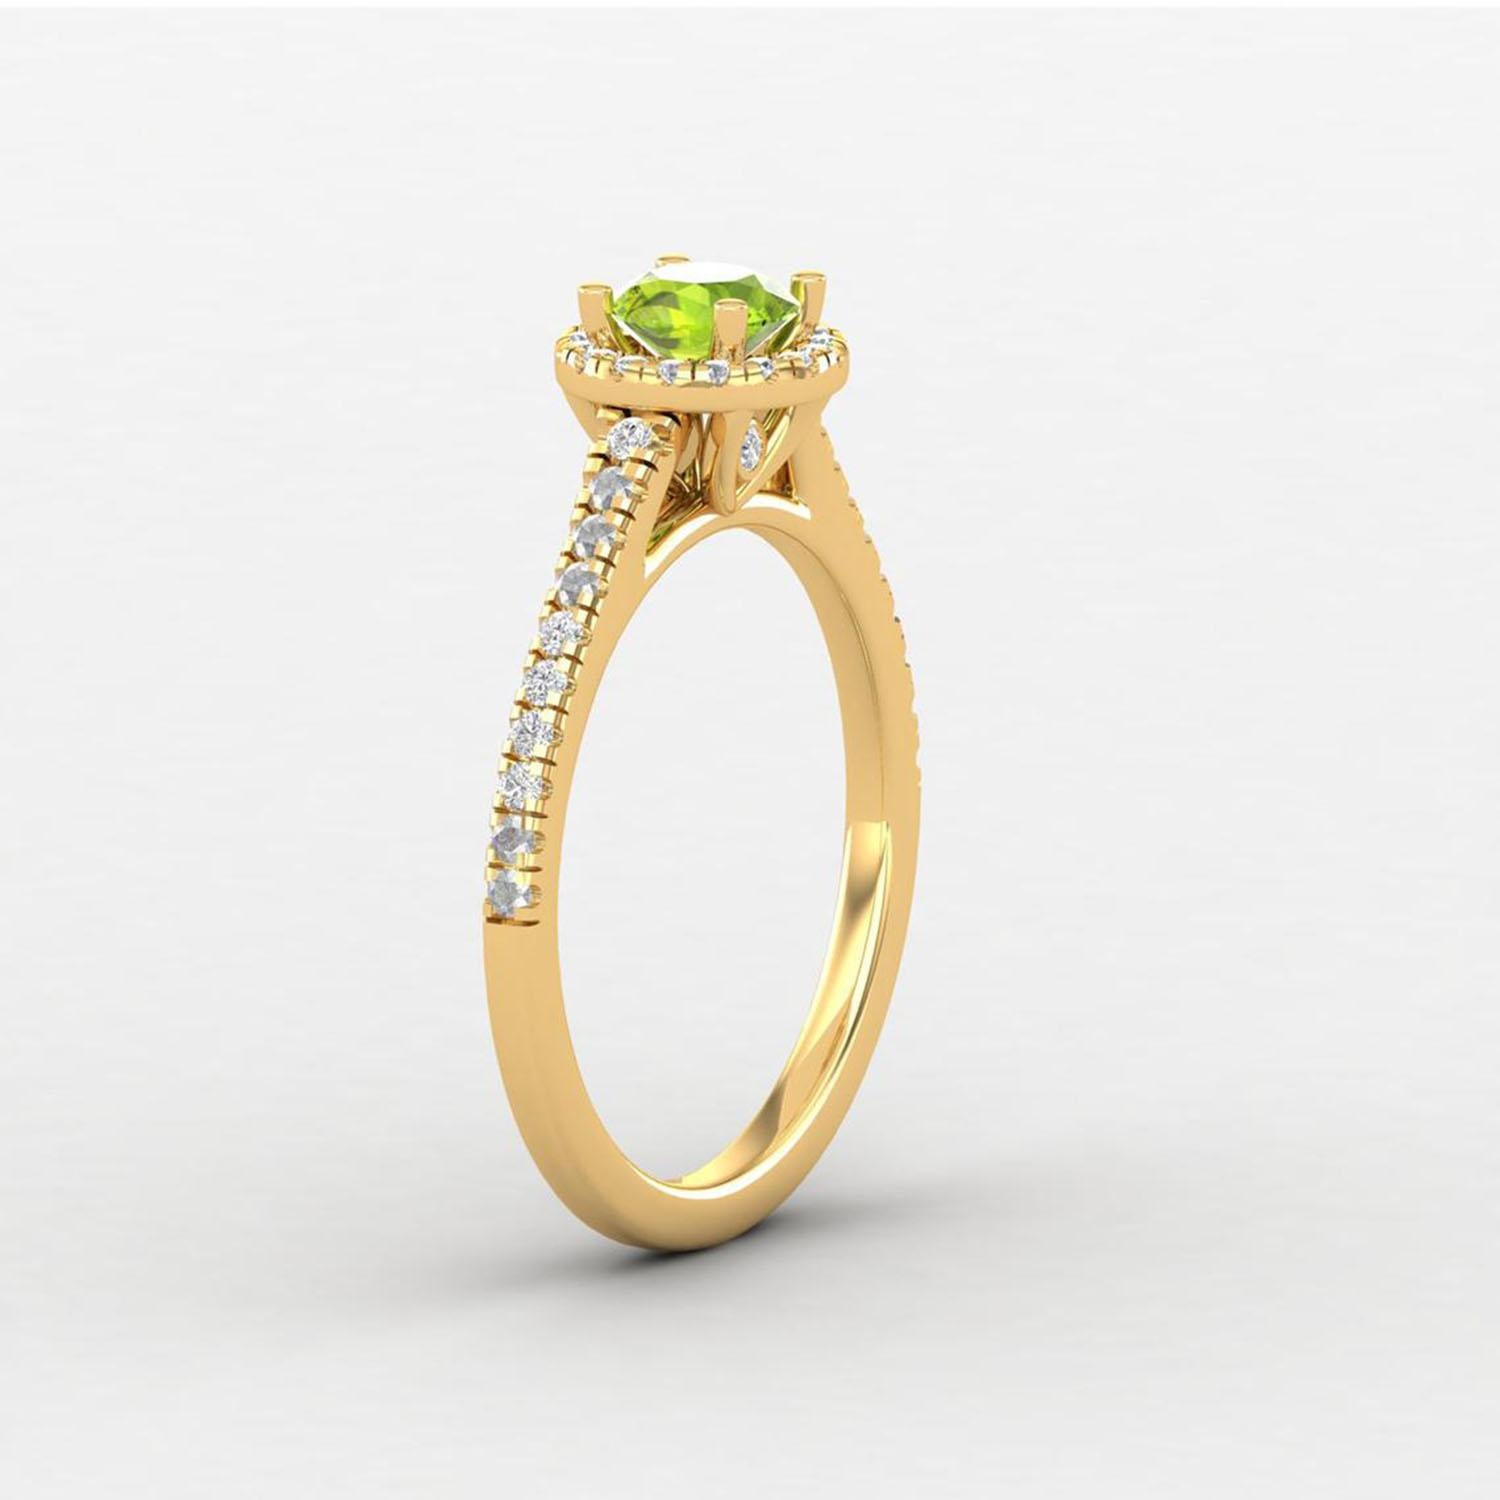 14 Karat Gold Peridot Ring / Round Diamond Ring / Solitaire Ring For Sale 5